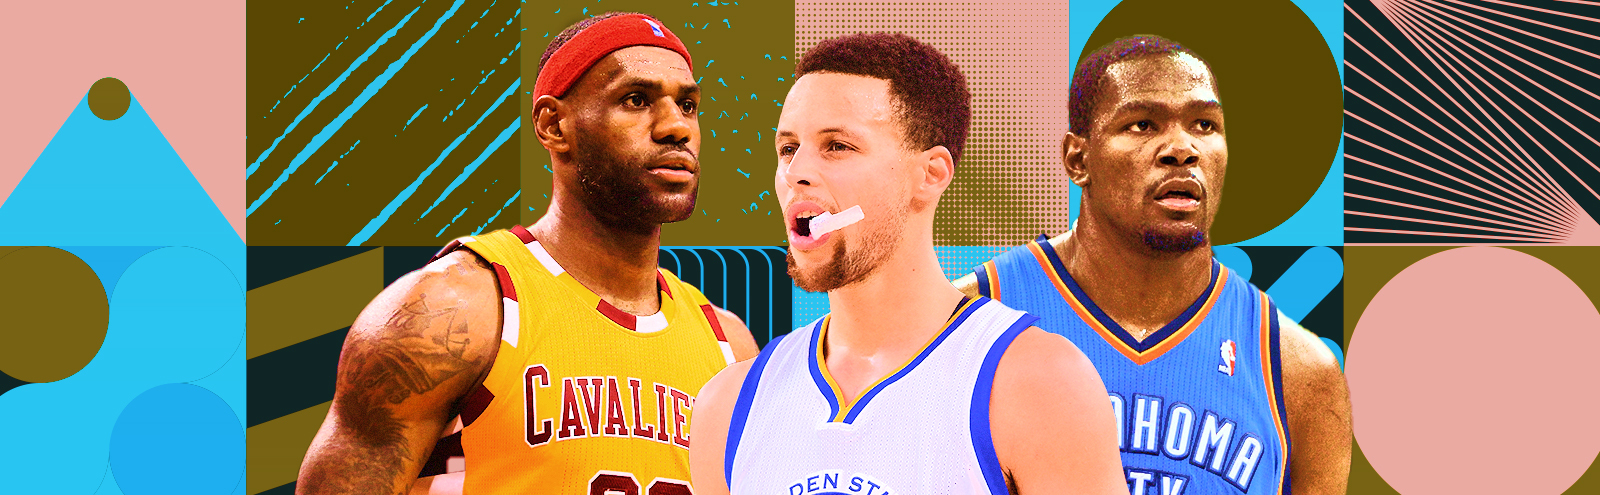 lebron james steph curry kevin durant